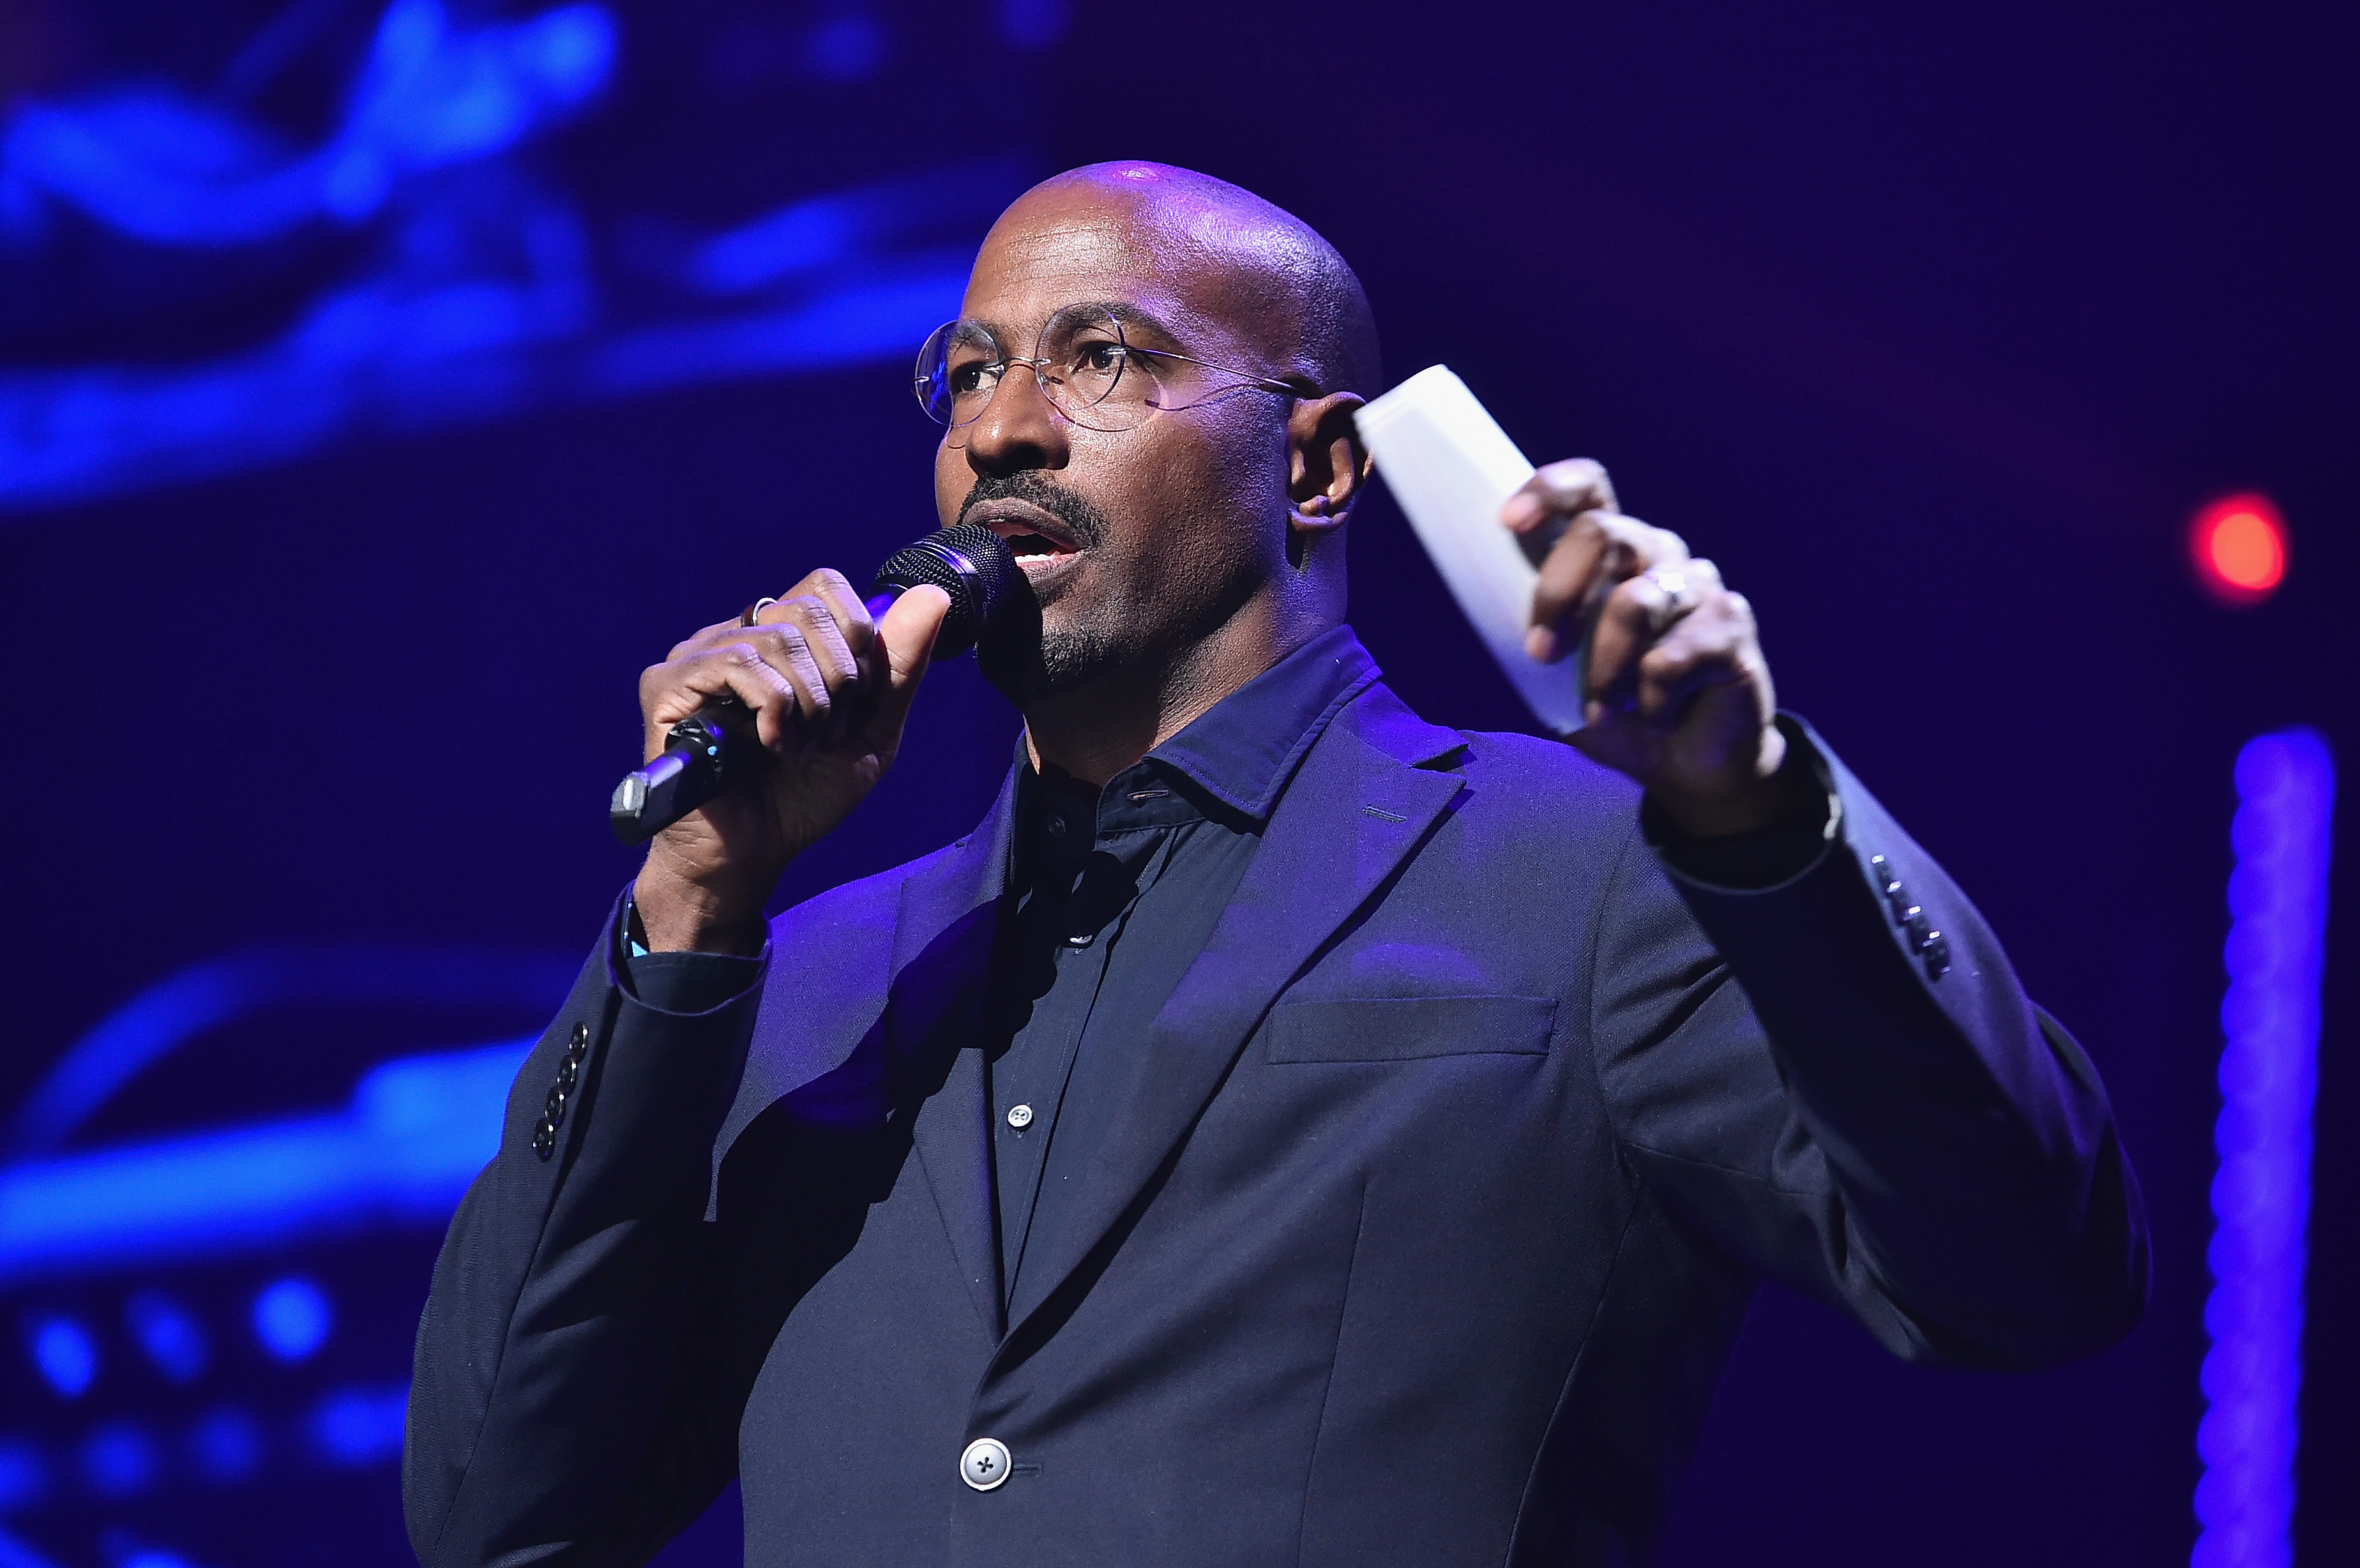 NEW YORK, NY - OCTOBER 23: Van Jones speaks onstage during the 4th Annual TIDAL X: Brooklyn at Barclays Center of Brooklyn on October 23, 2018 in New York City. (Photo by Theo Wargo/Getty Images for TIDAL)